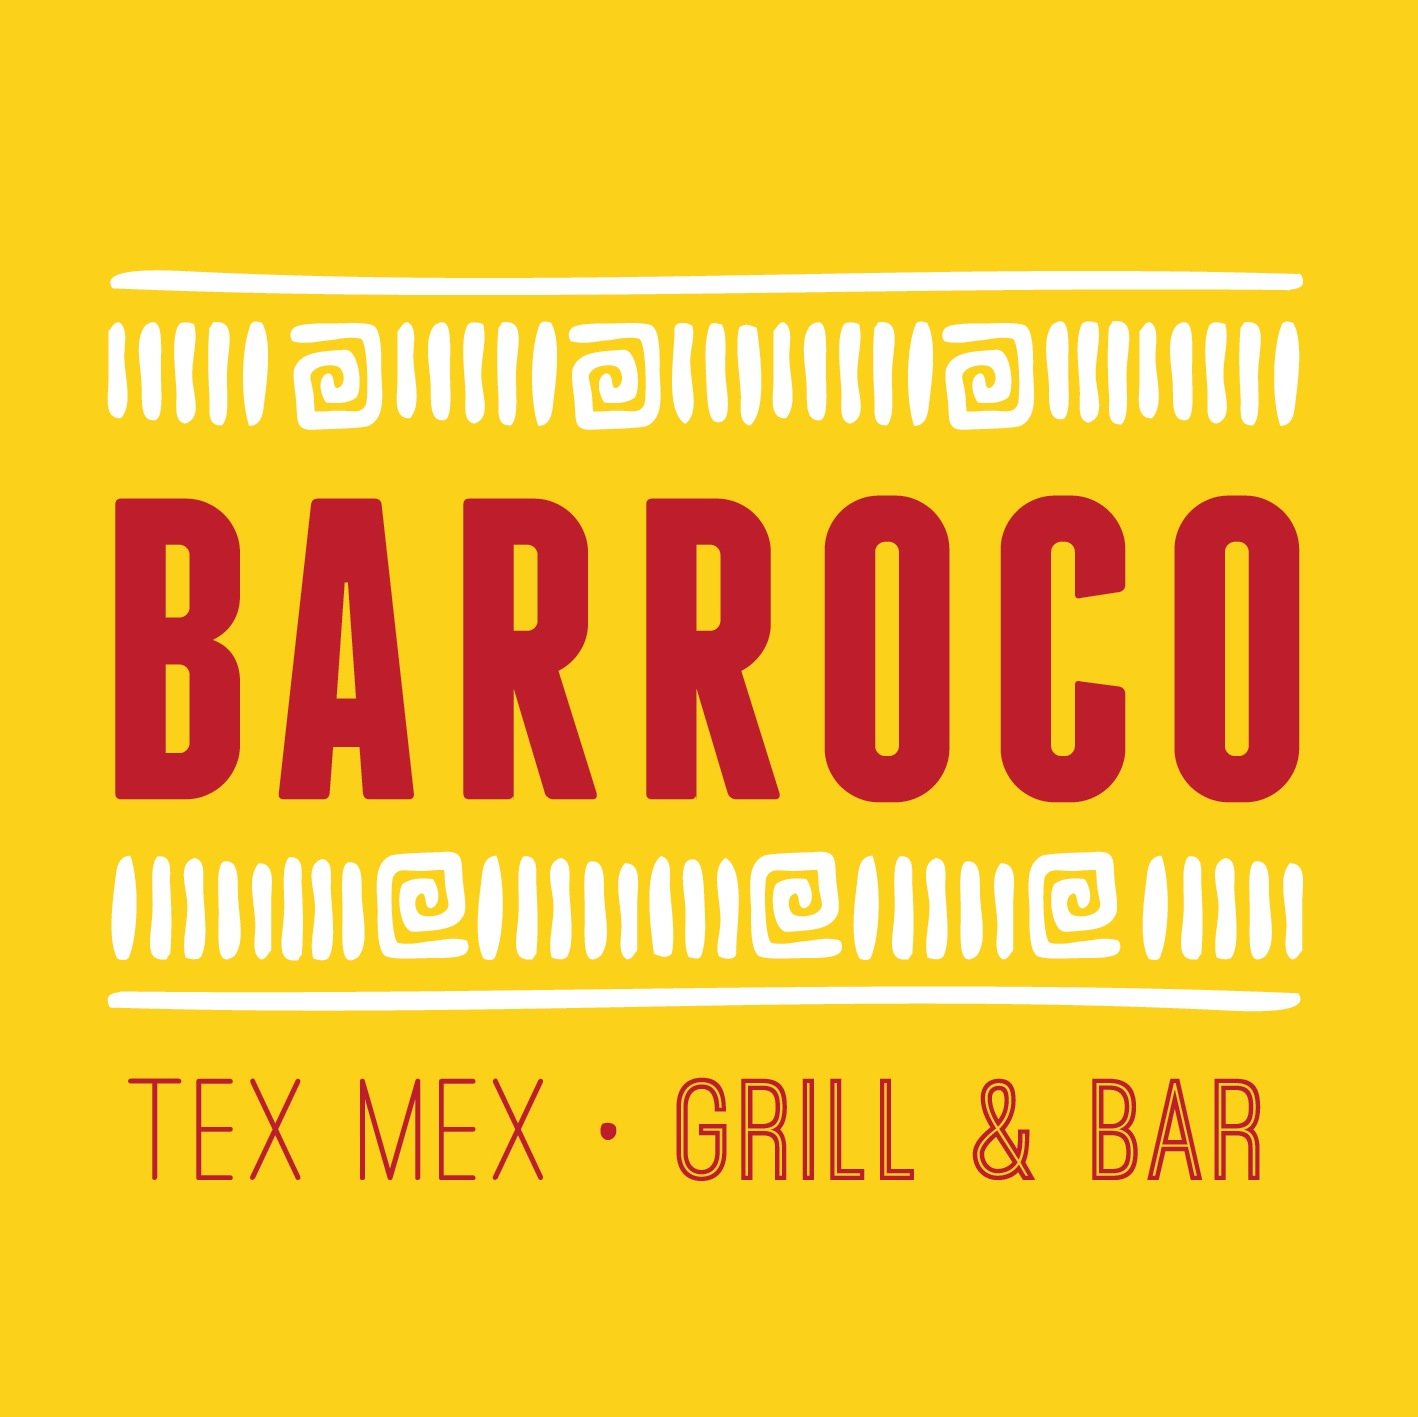 Serving modern cocktails and social food, our Mexican inspired menu is flavourful, sharable and affordable.